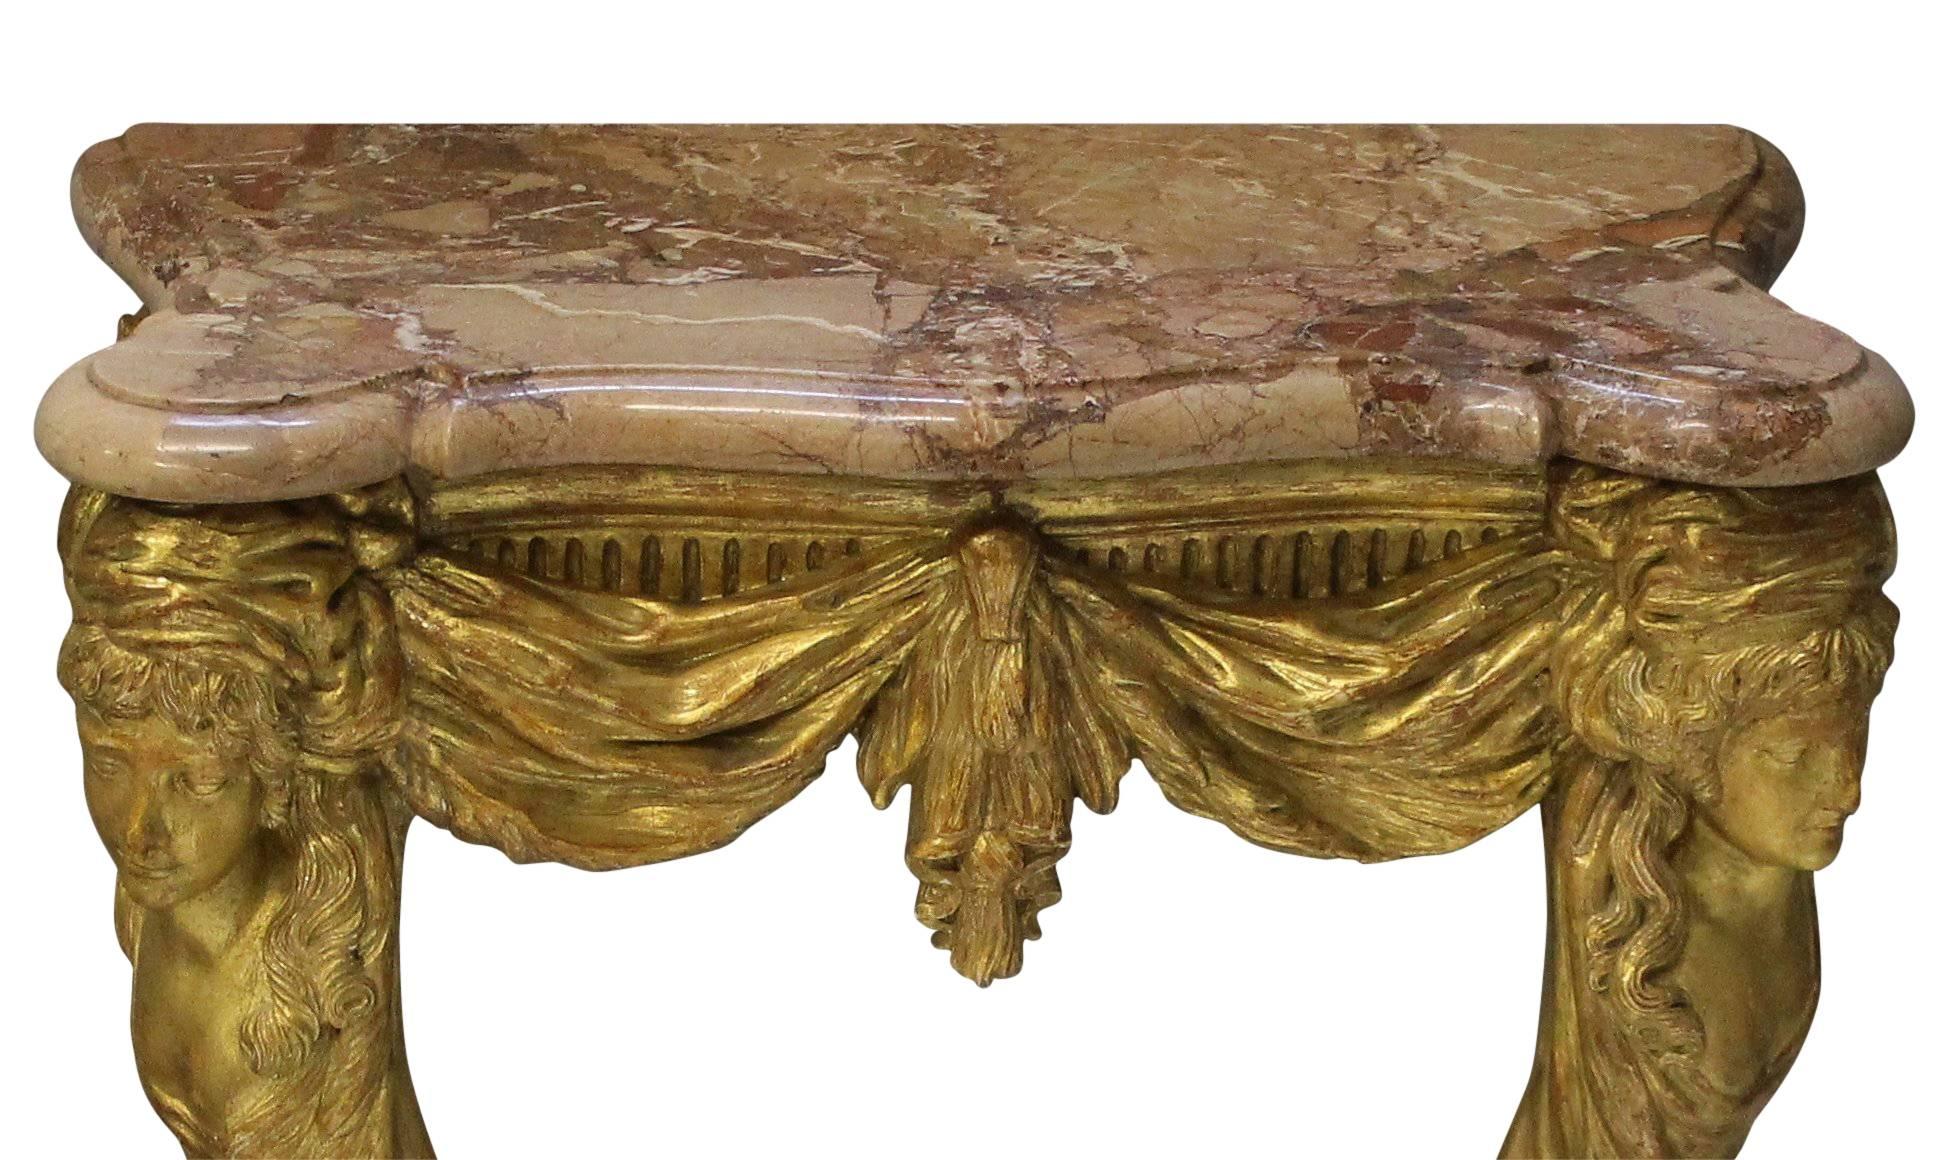 A fine English carved and water gilded console table in the manner of William Kent. The neoclassical design incorporates classical female heads and swags with goat hoof feet and a shaped marble top.
 